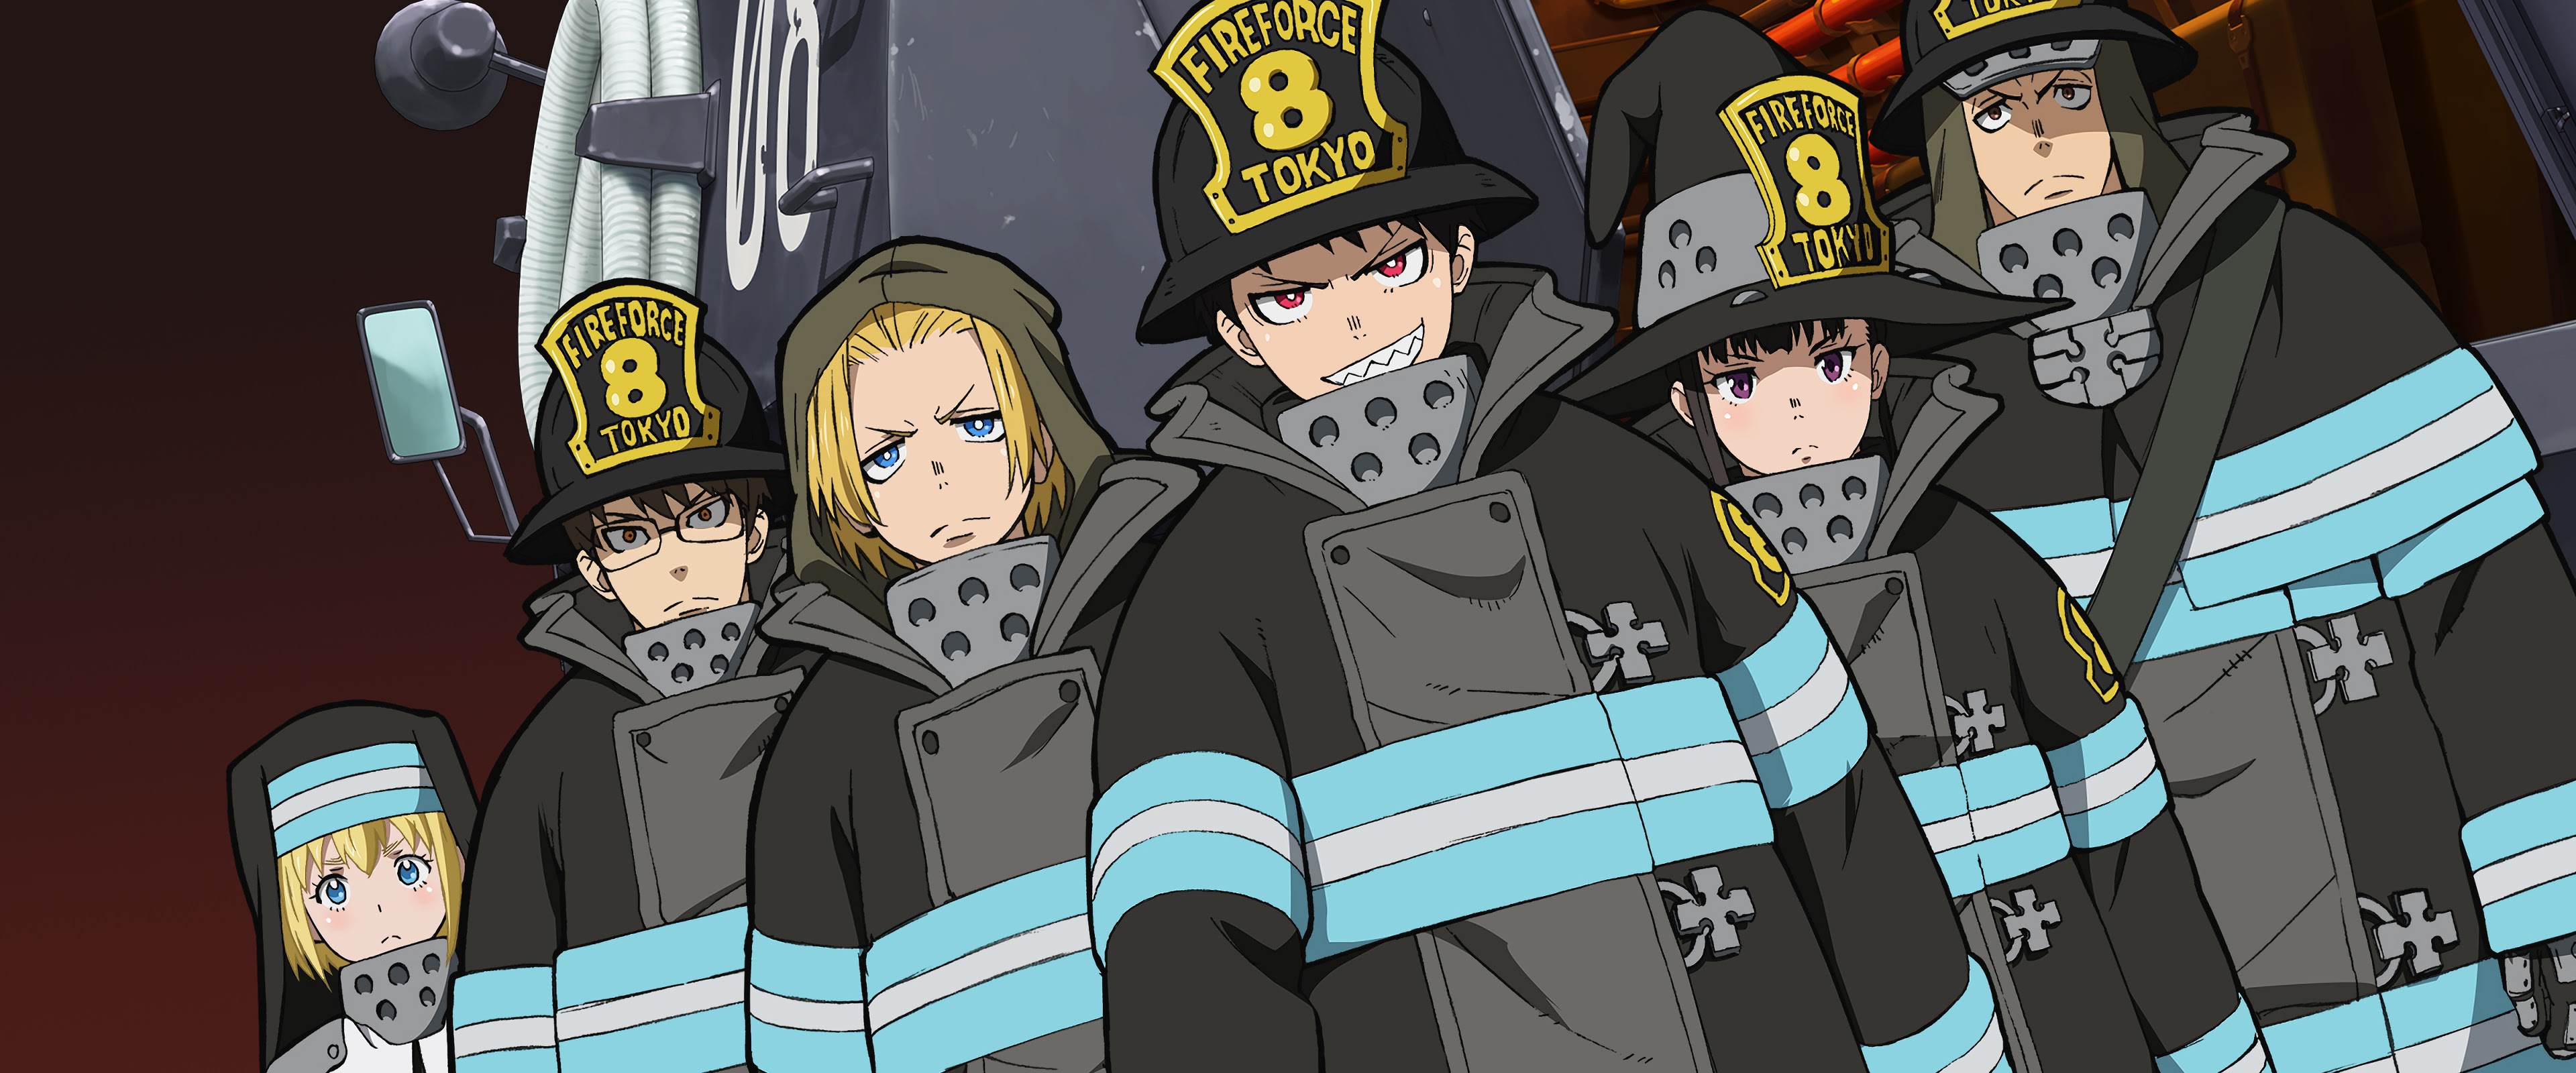 Fire Force: Special Fire Force Company 8 / Characters - TV Tropes